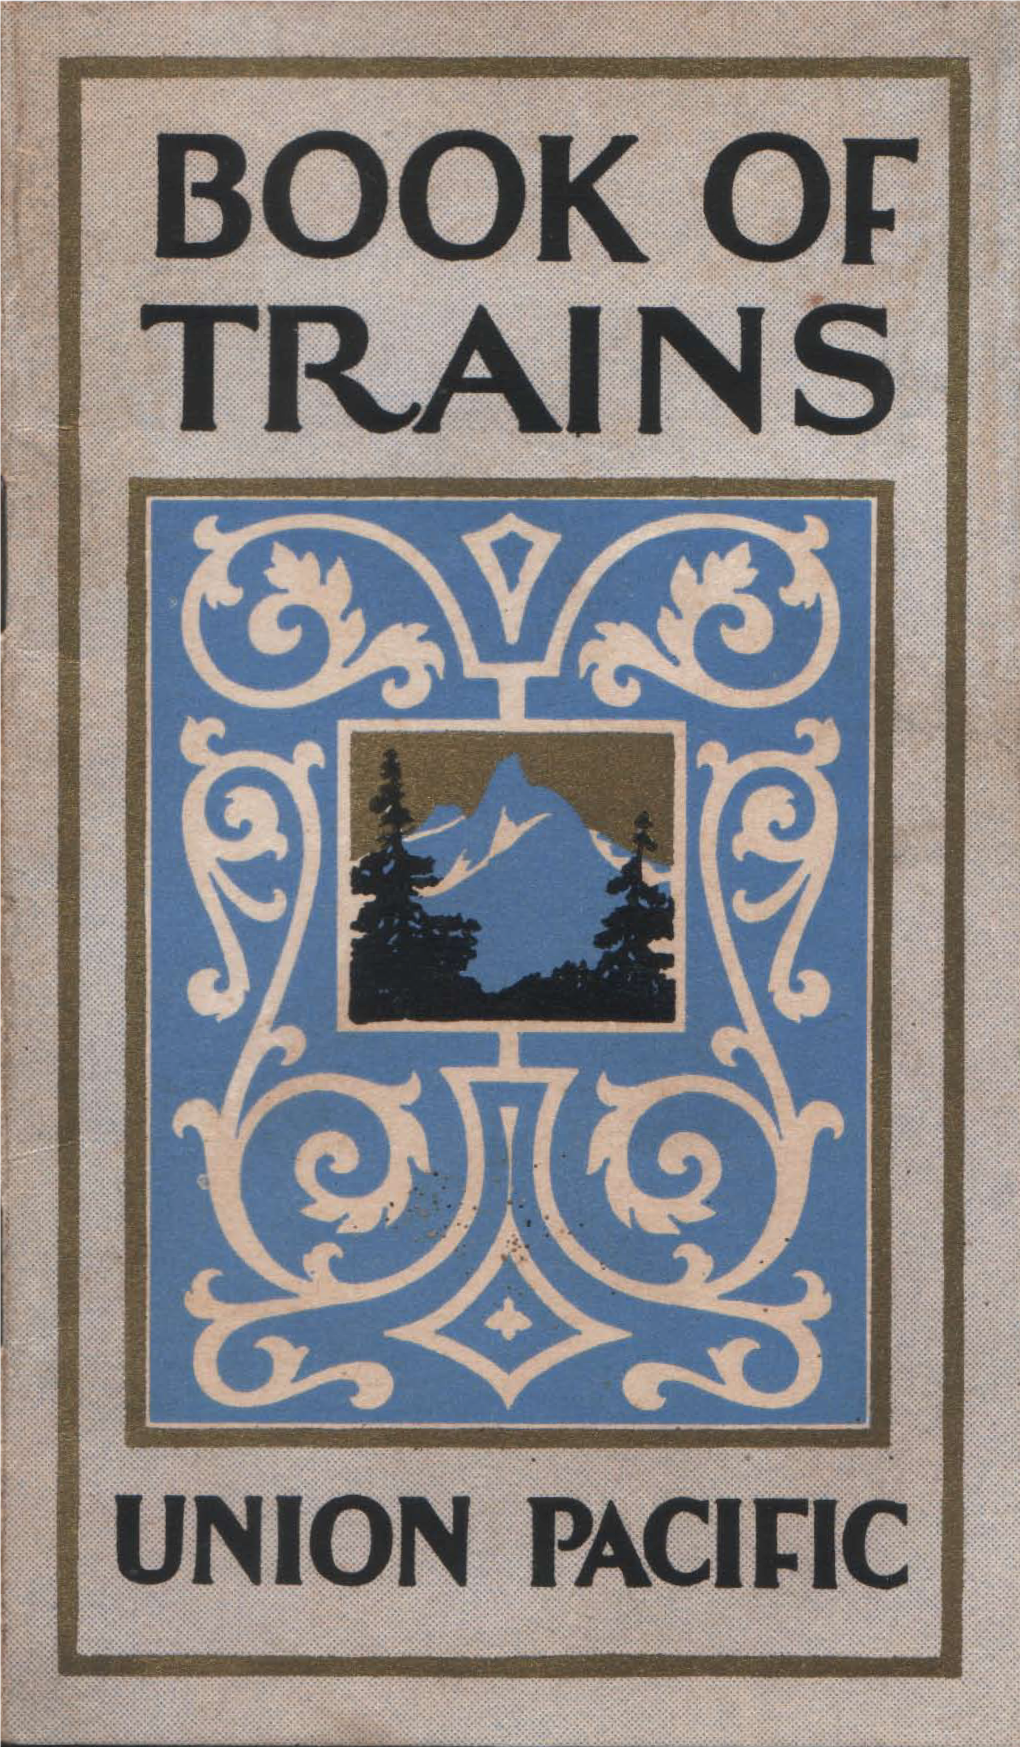 BOOK of TRAINS